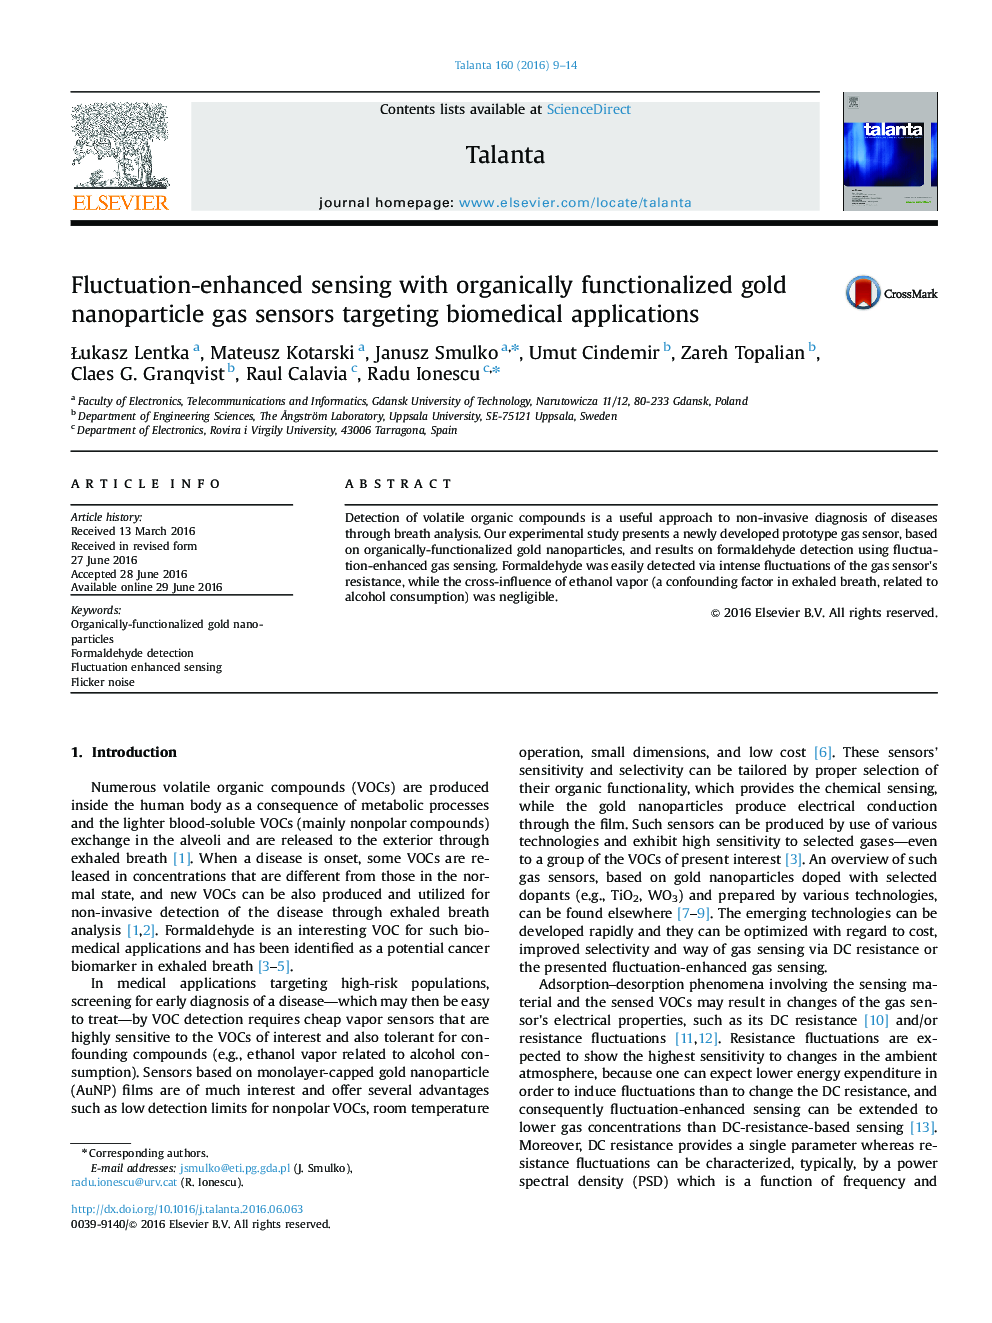 Fluctuation-enhanced sensing with organically functionalized gold nanoparticle gas sensors targeting biomedical applications